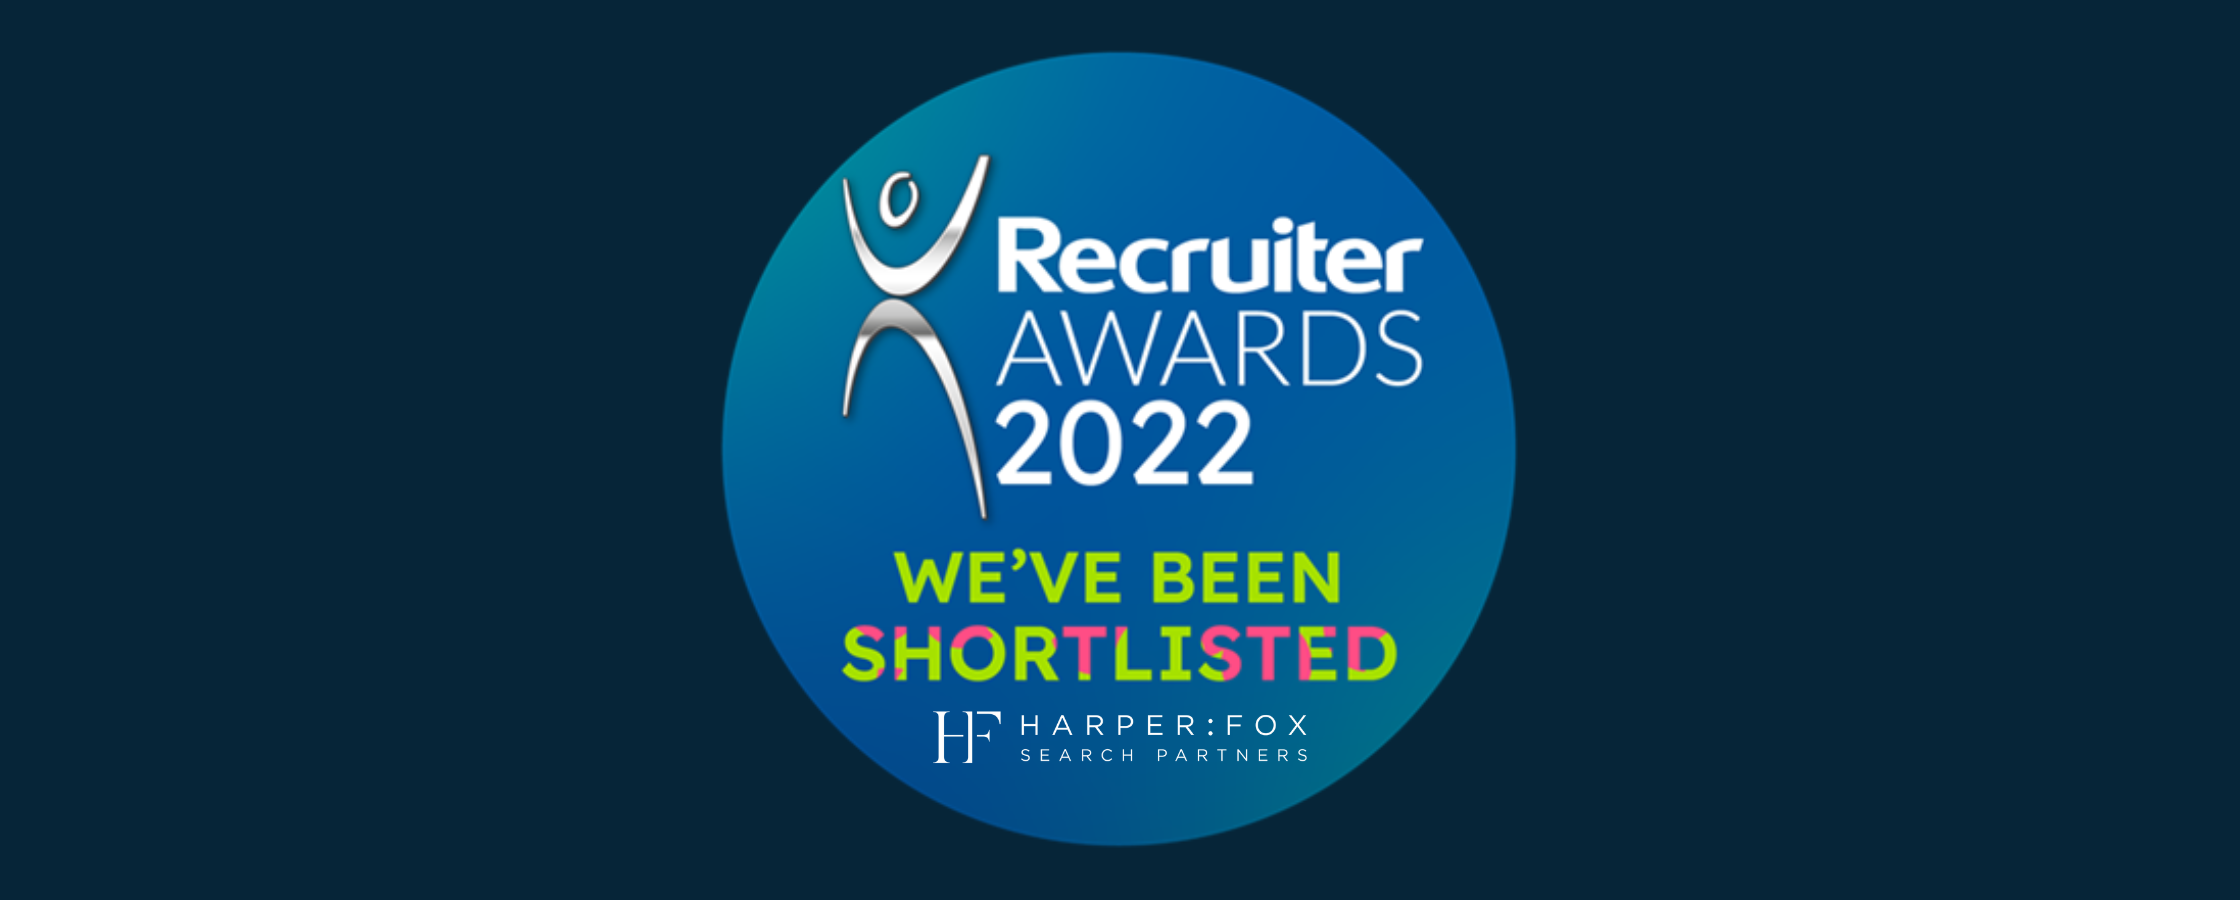 Executive Search Firm Harper Fox Partners have been shortlisted for four awards at this year's Recruiter Awards.